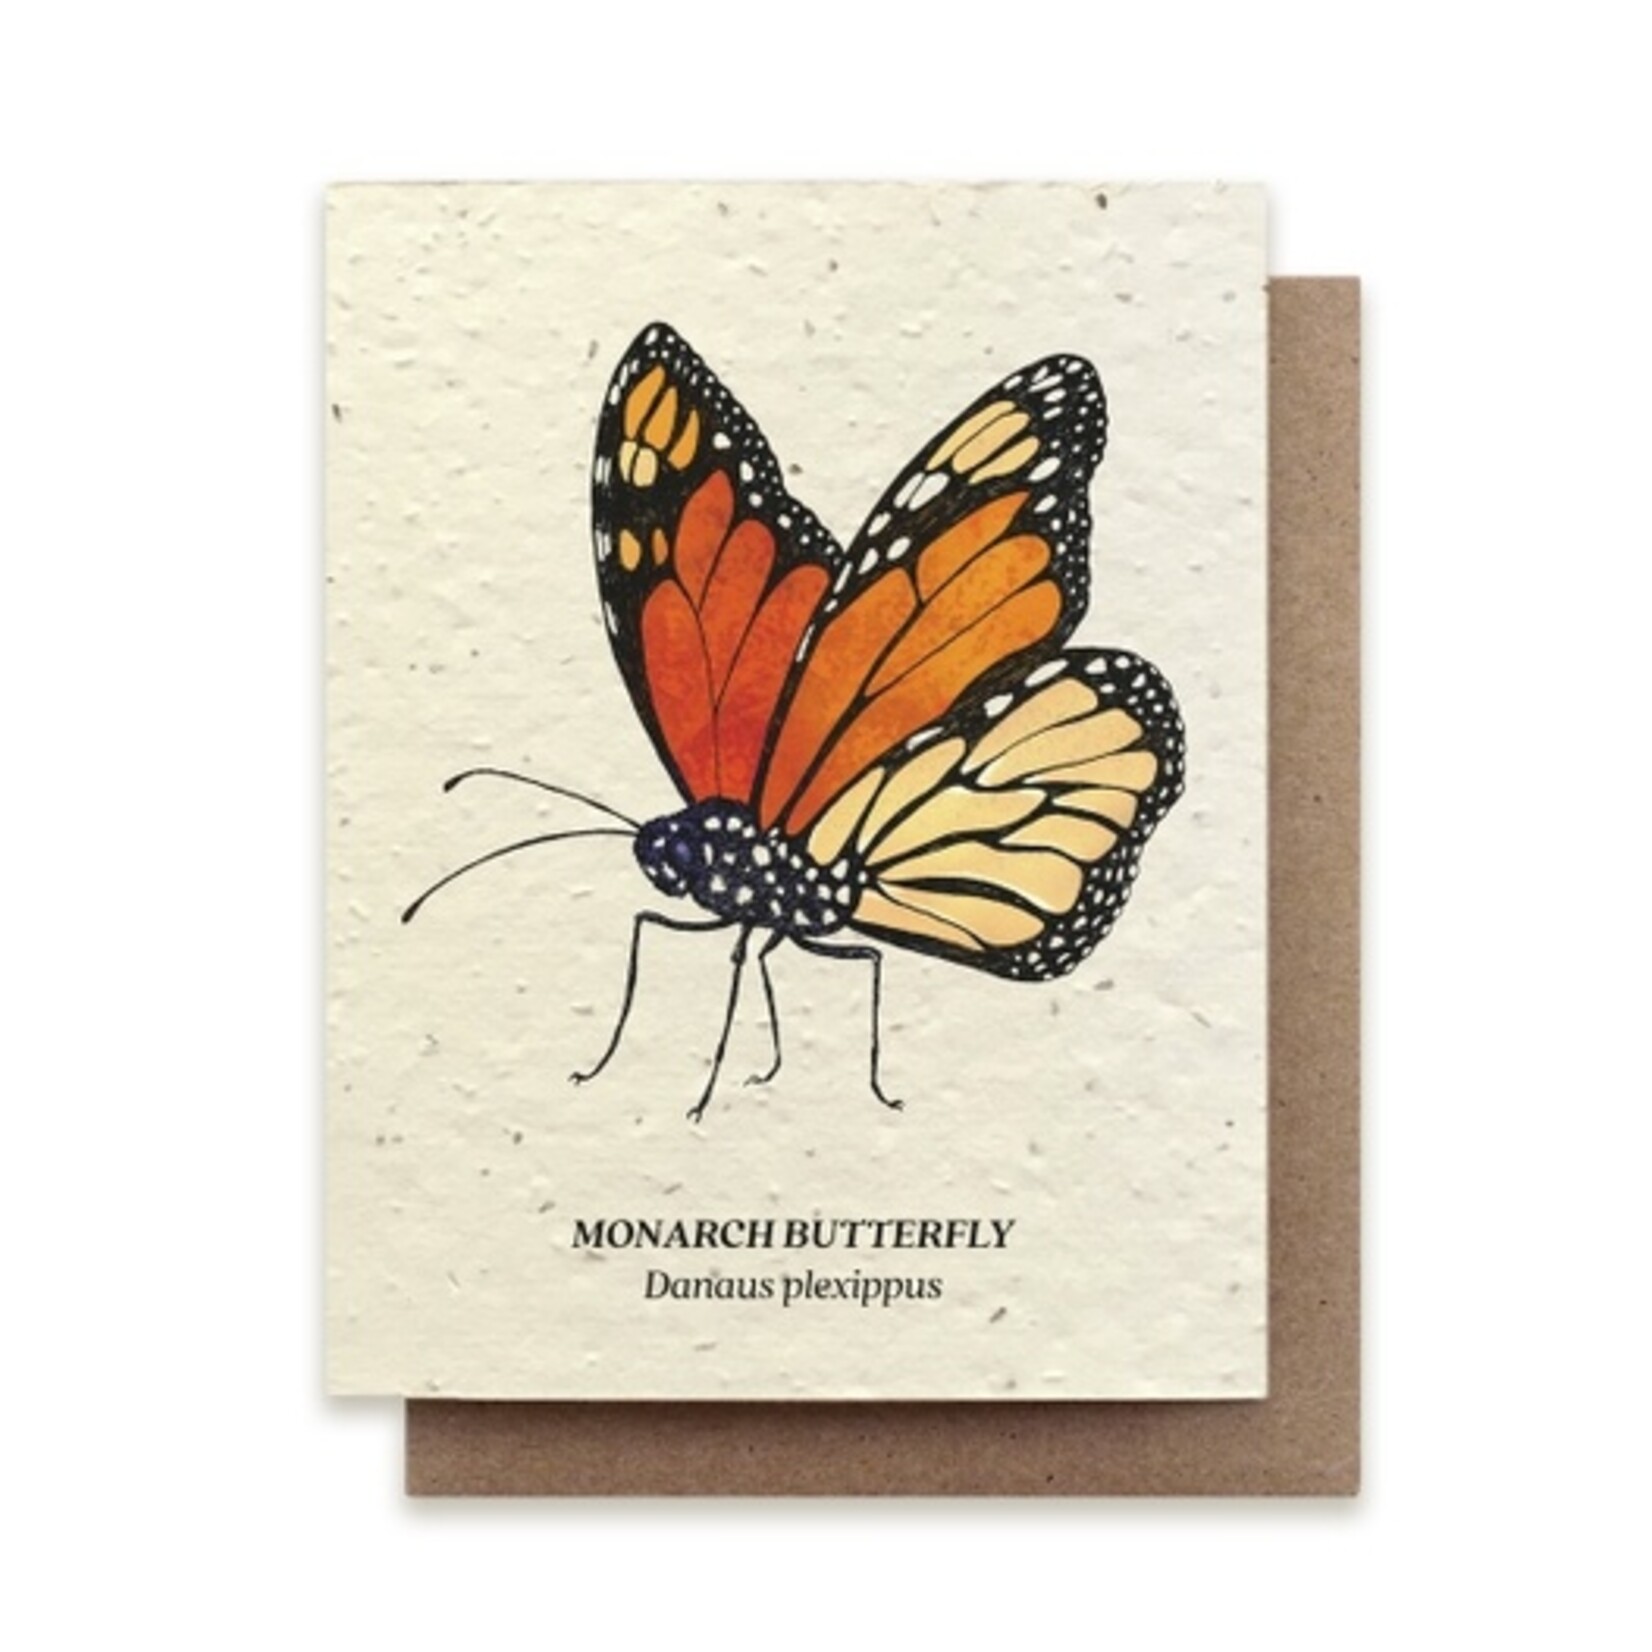 Small Victories The Bower Studio Monarch Butterfly Plantable Wildflower Seed Card